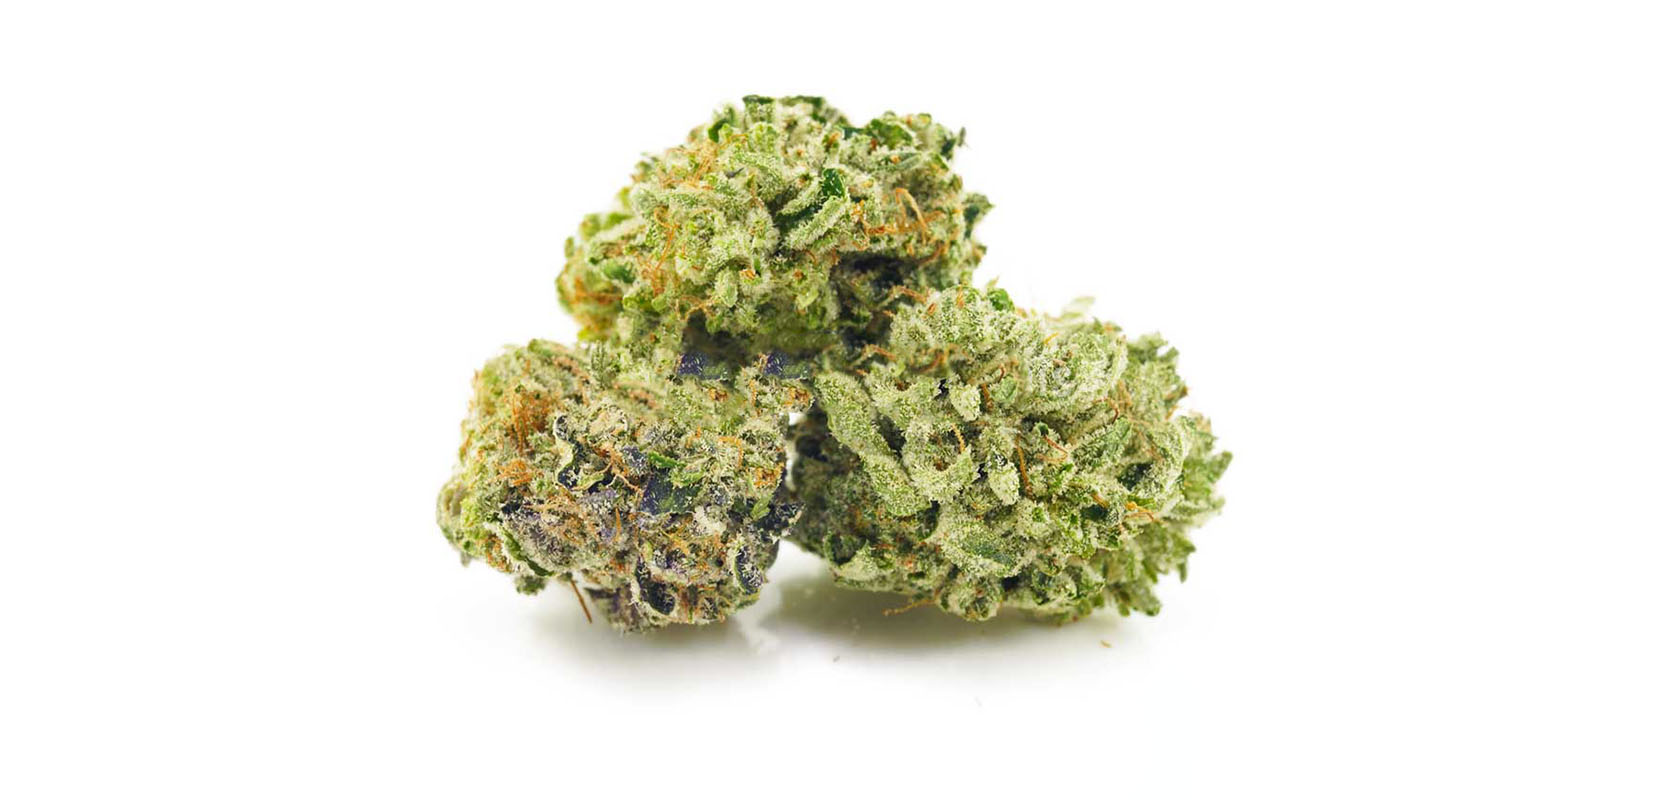 Sophie's Breath Strain weed online Canada at Low Price Bud online dispensary in Canada for BC cannabis. buy weed canada. mail order cannabis canada. concentrates canada. Dispencary.